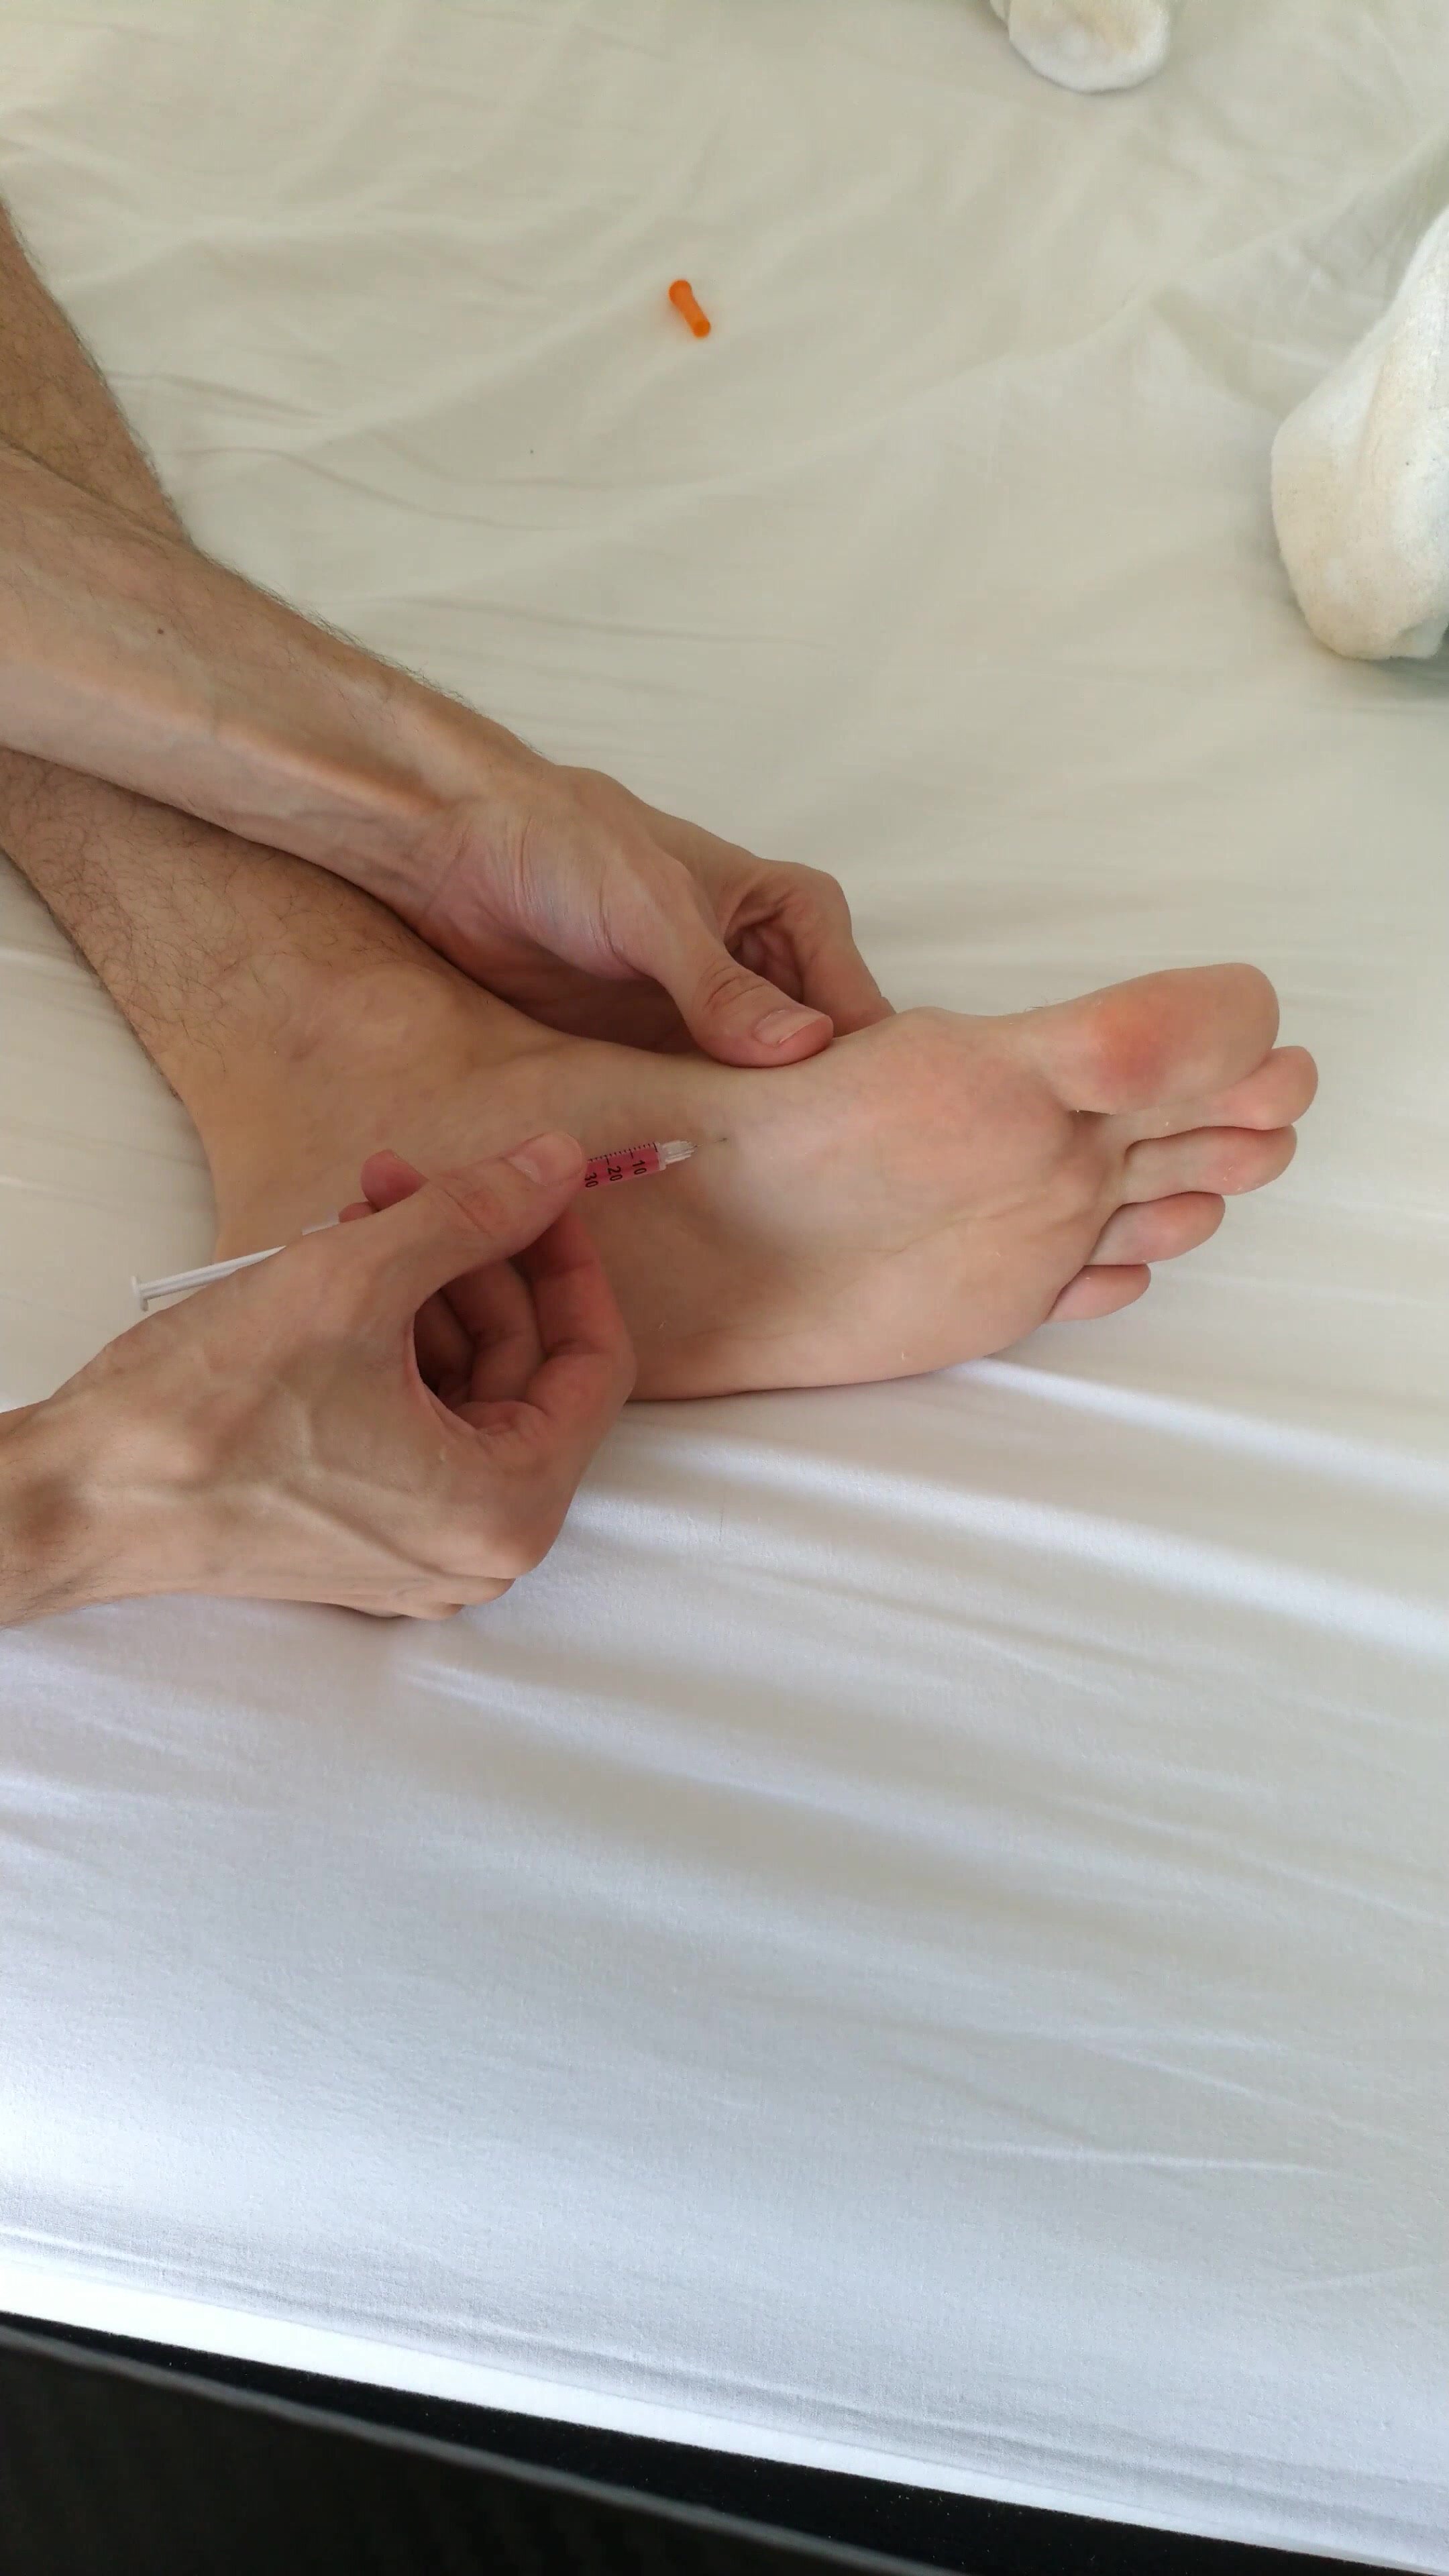 Twink bare foot B12 injection 2/2